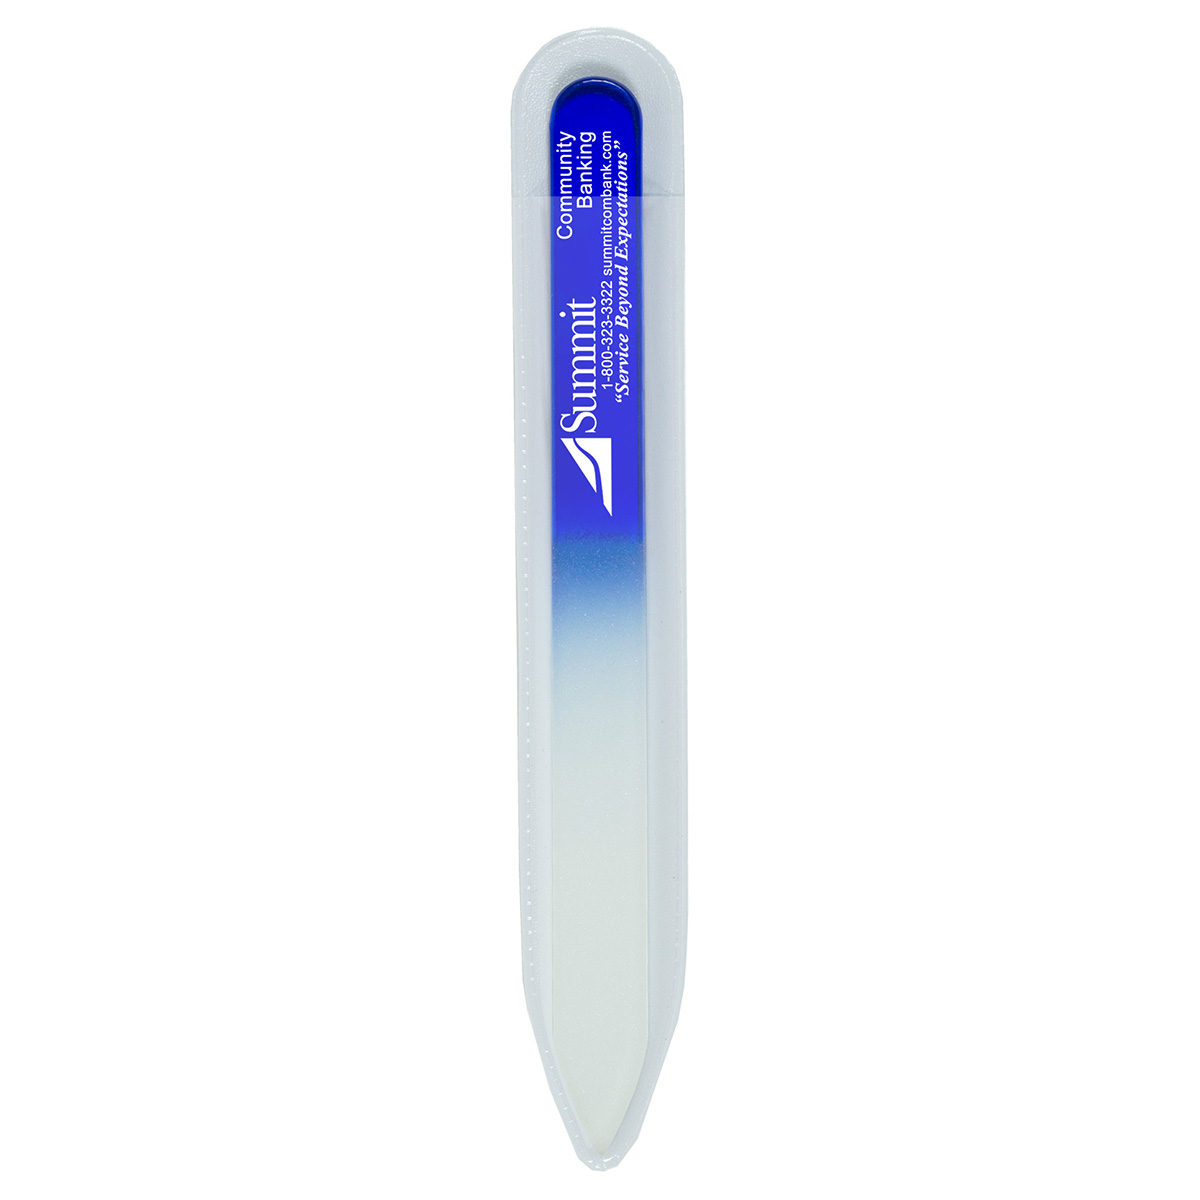 "NAILED IT" Tempered Glass Nail File in Clear Sleeve